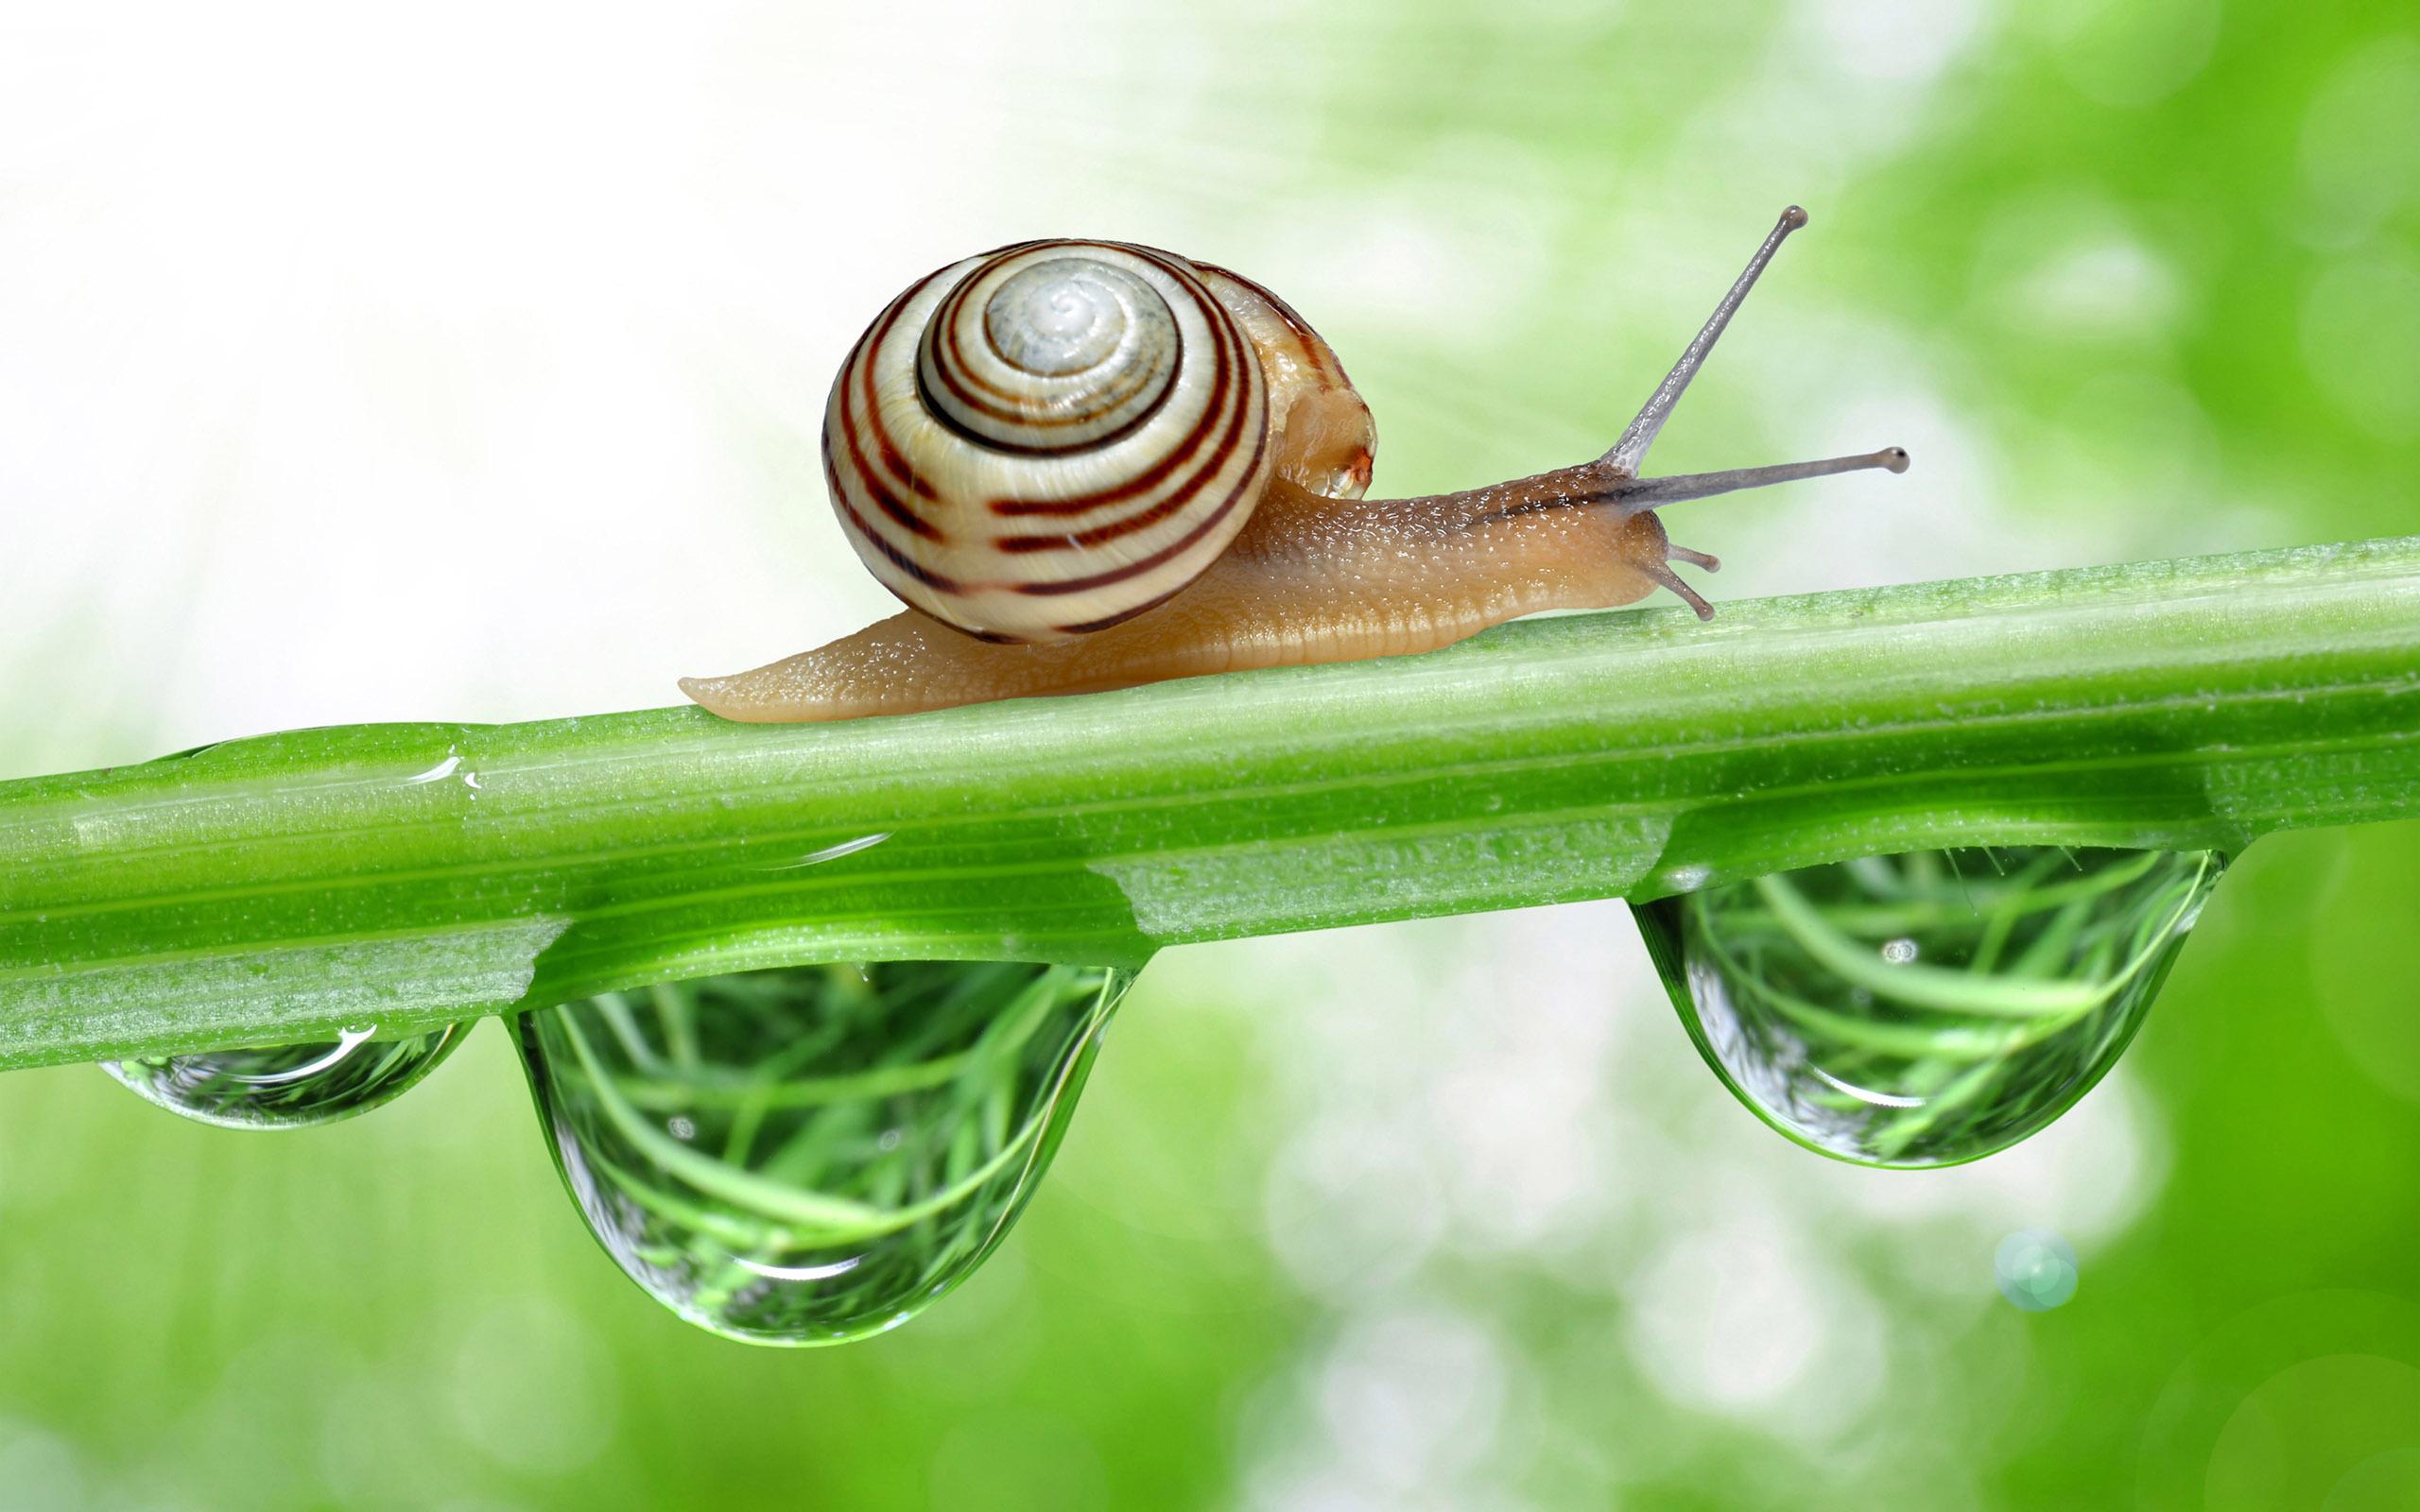 Ways to Get Rid of Snails & Slugs from Your Garden